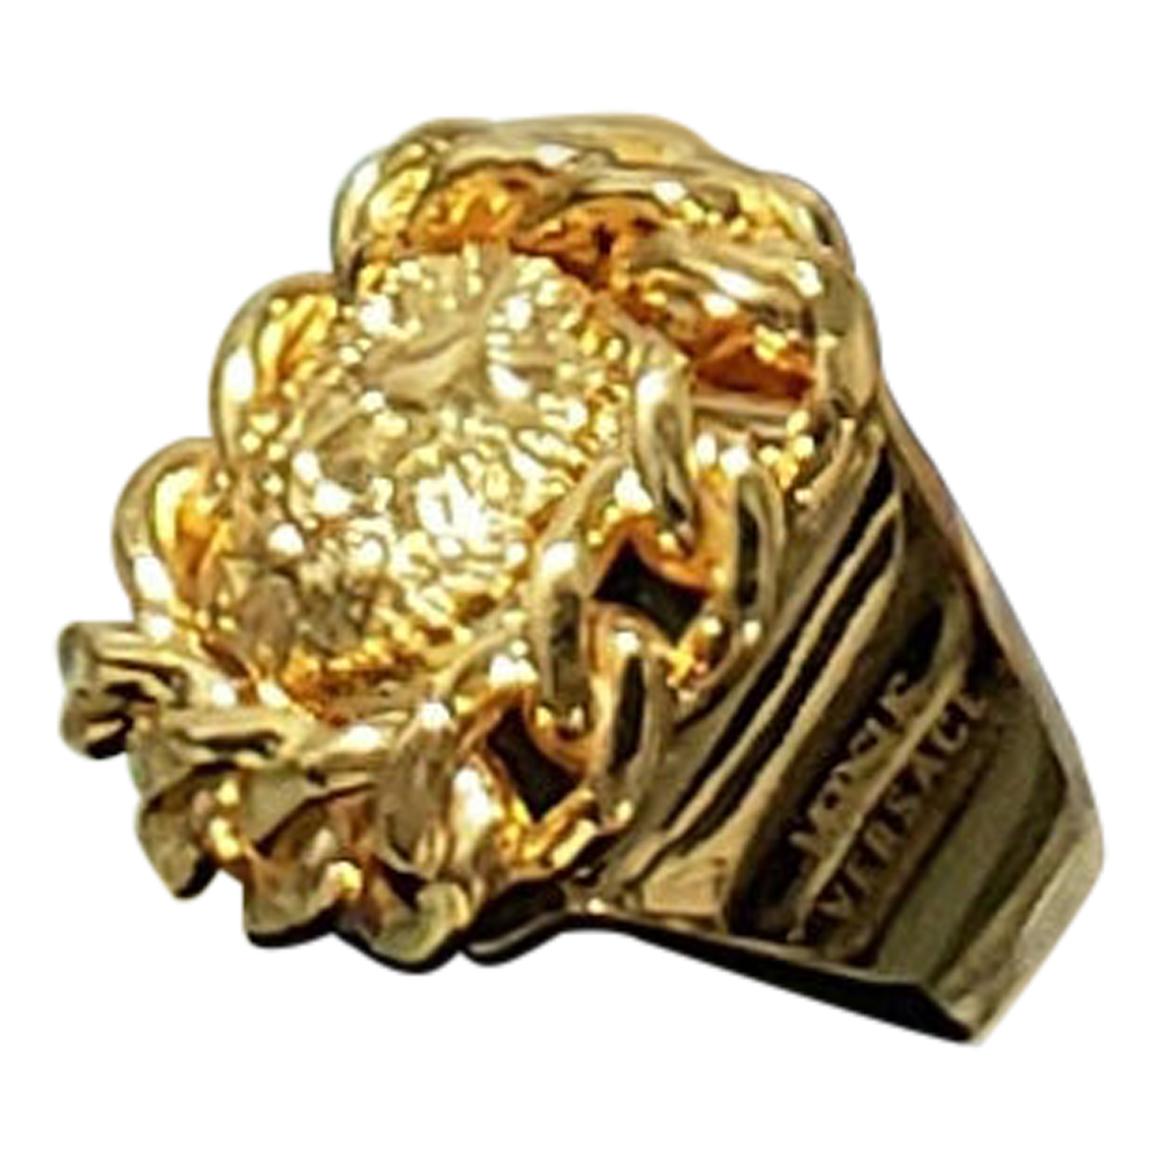 VERSUS VERSACE 24K GOLD PLATED GOLD LION RING size 9 For Sale